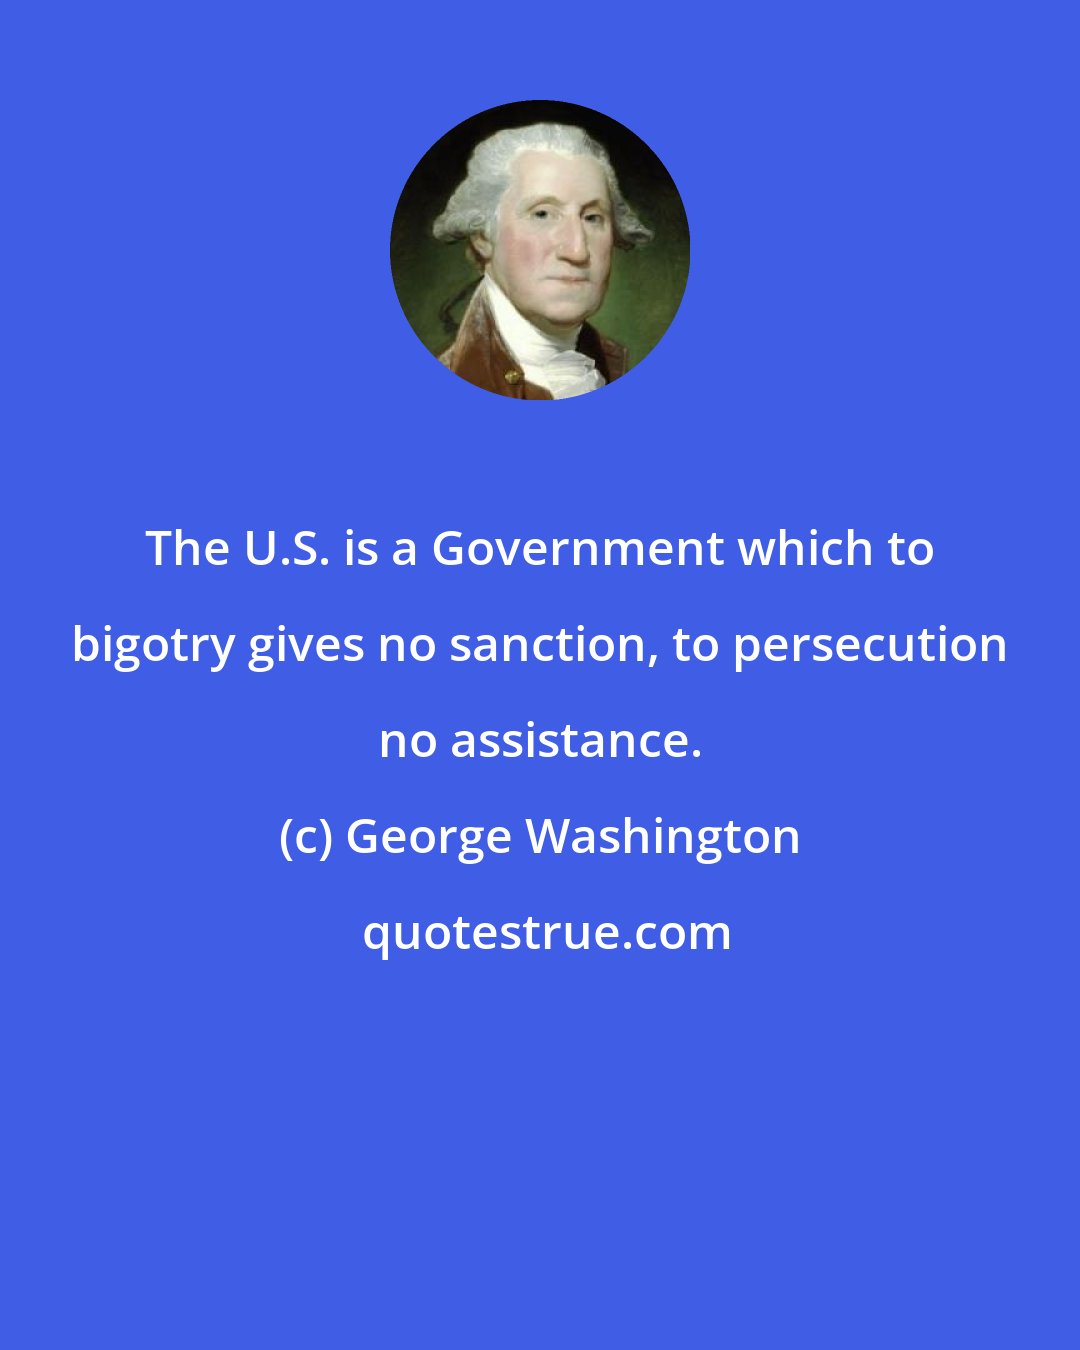 George Washington: The U.S. is a Government which to bigotry gives no sanction, to persecution no assistance.